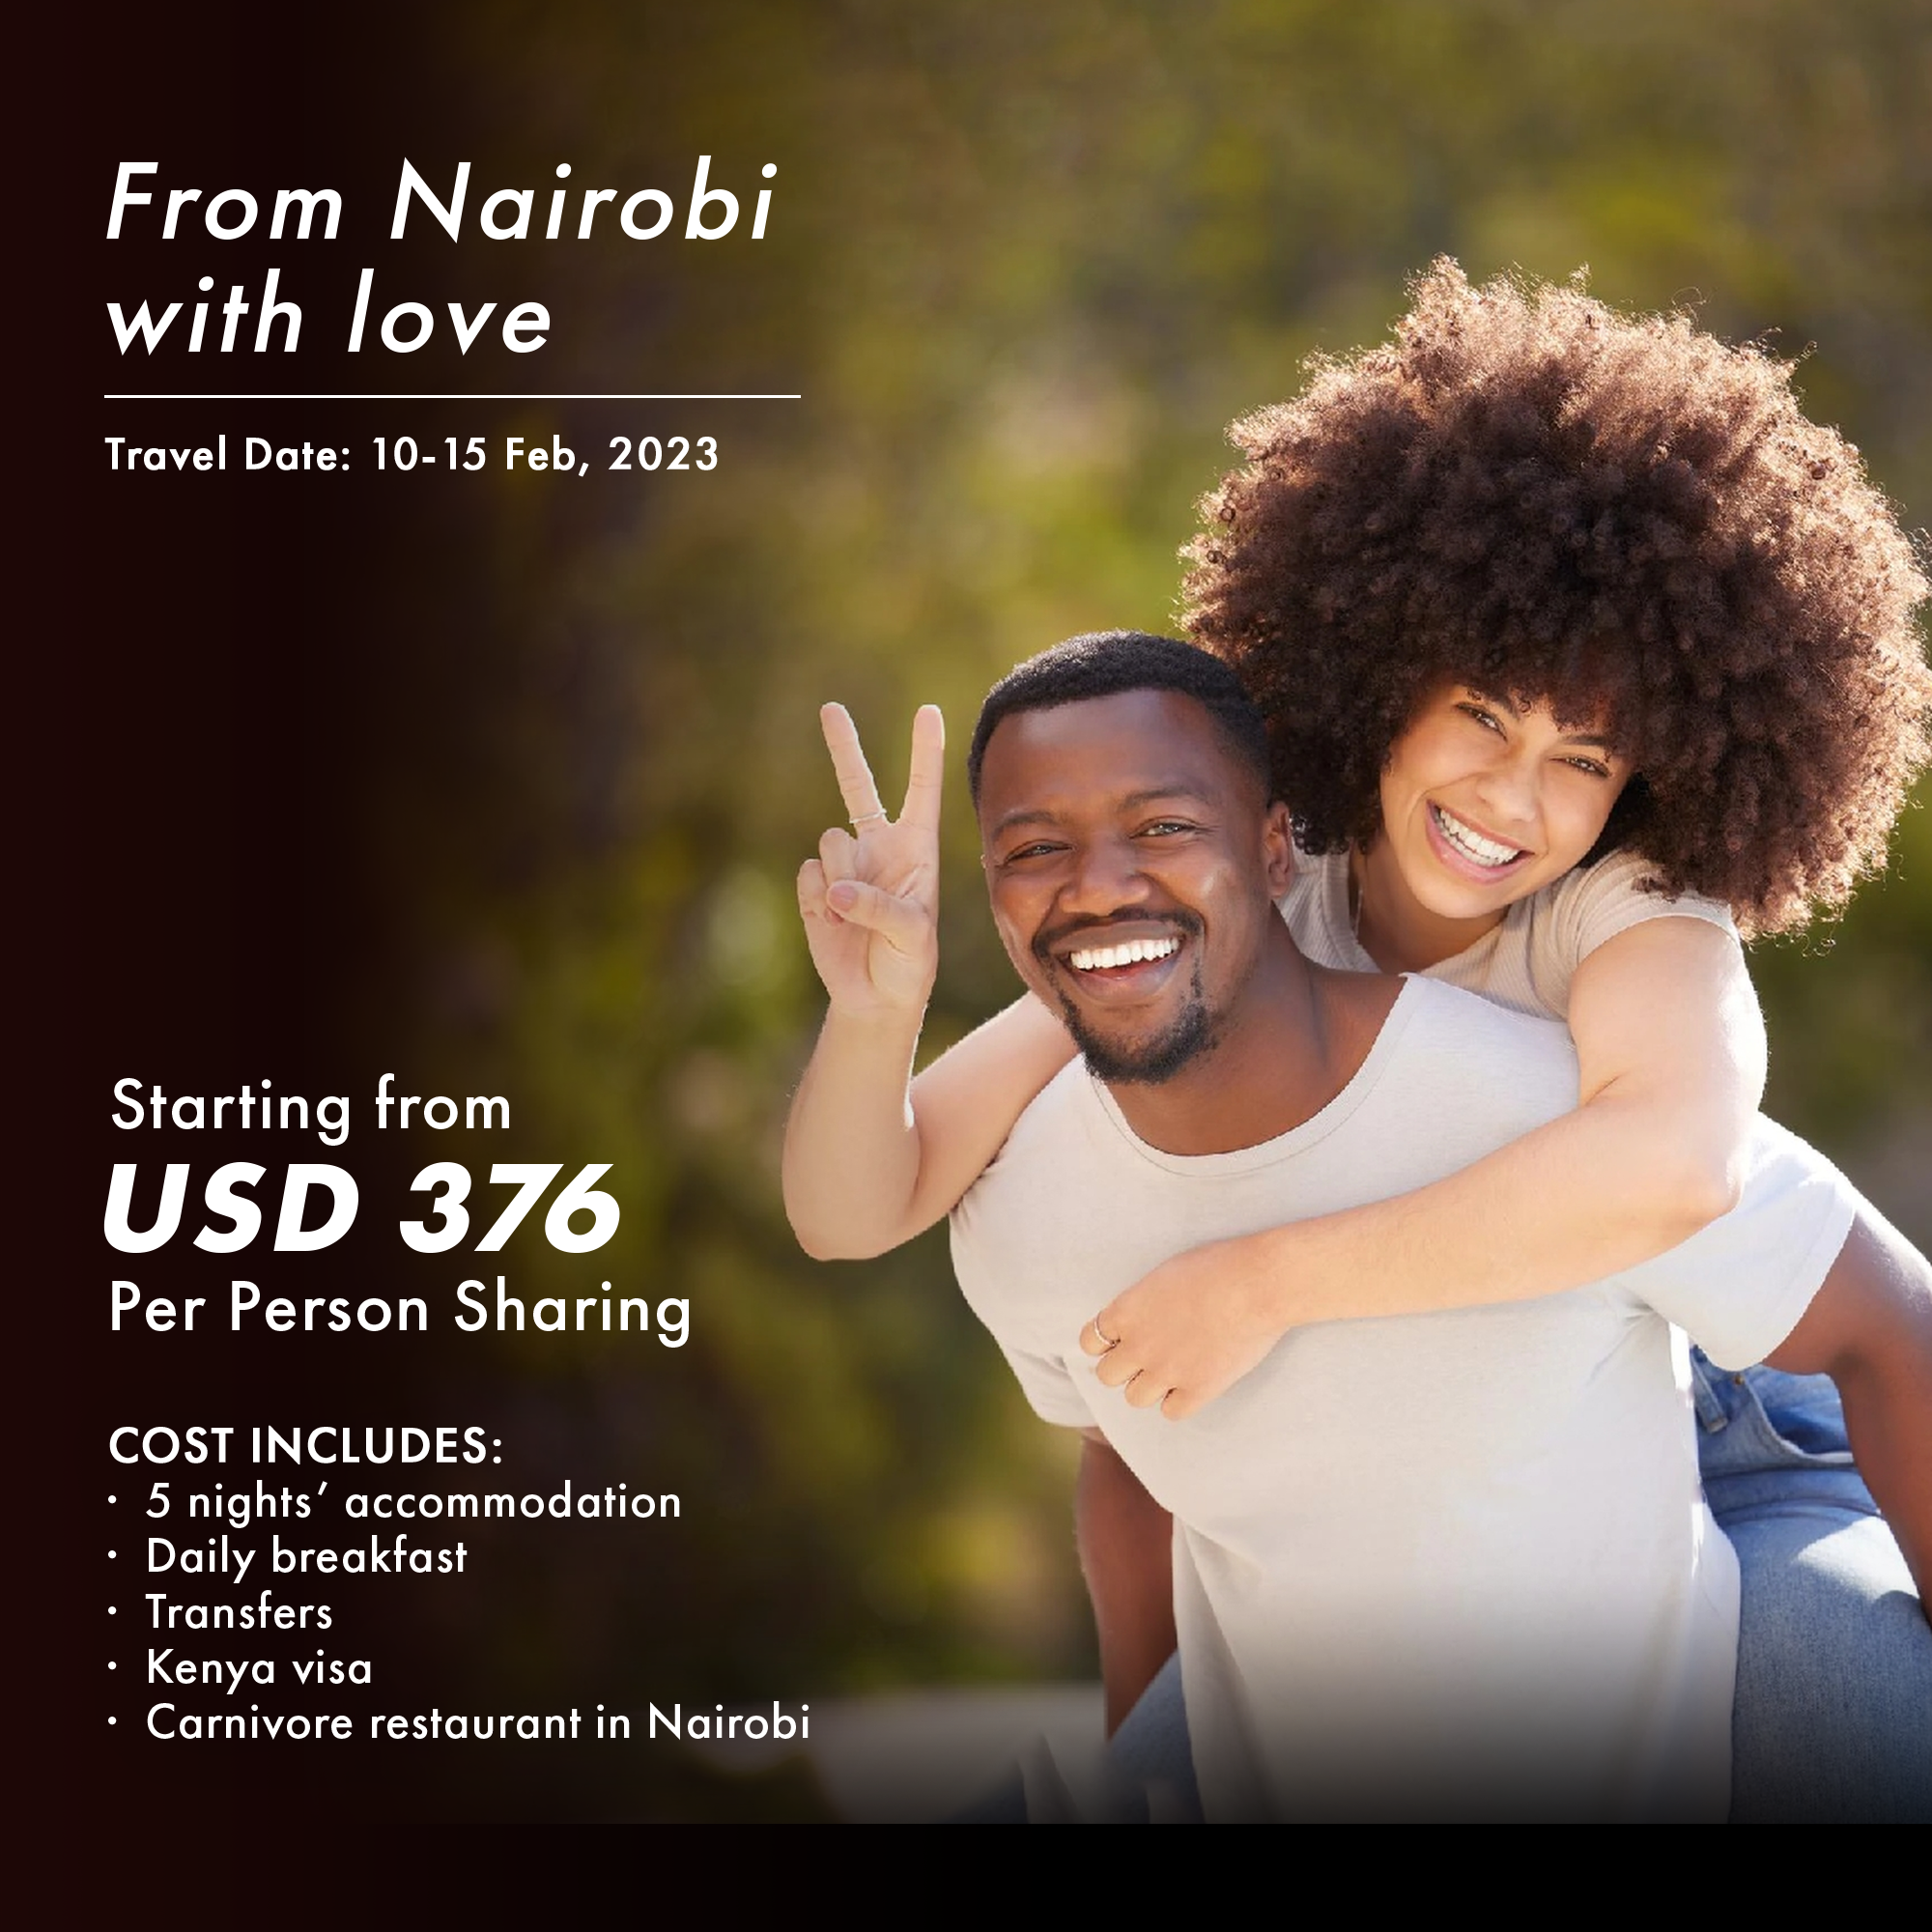 From Nairobi with love web